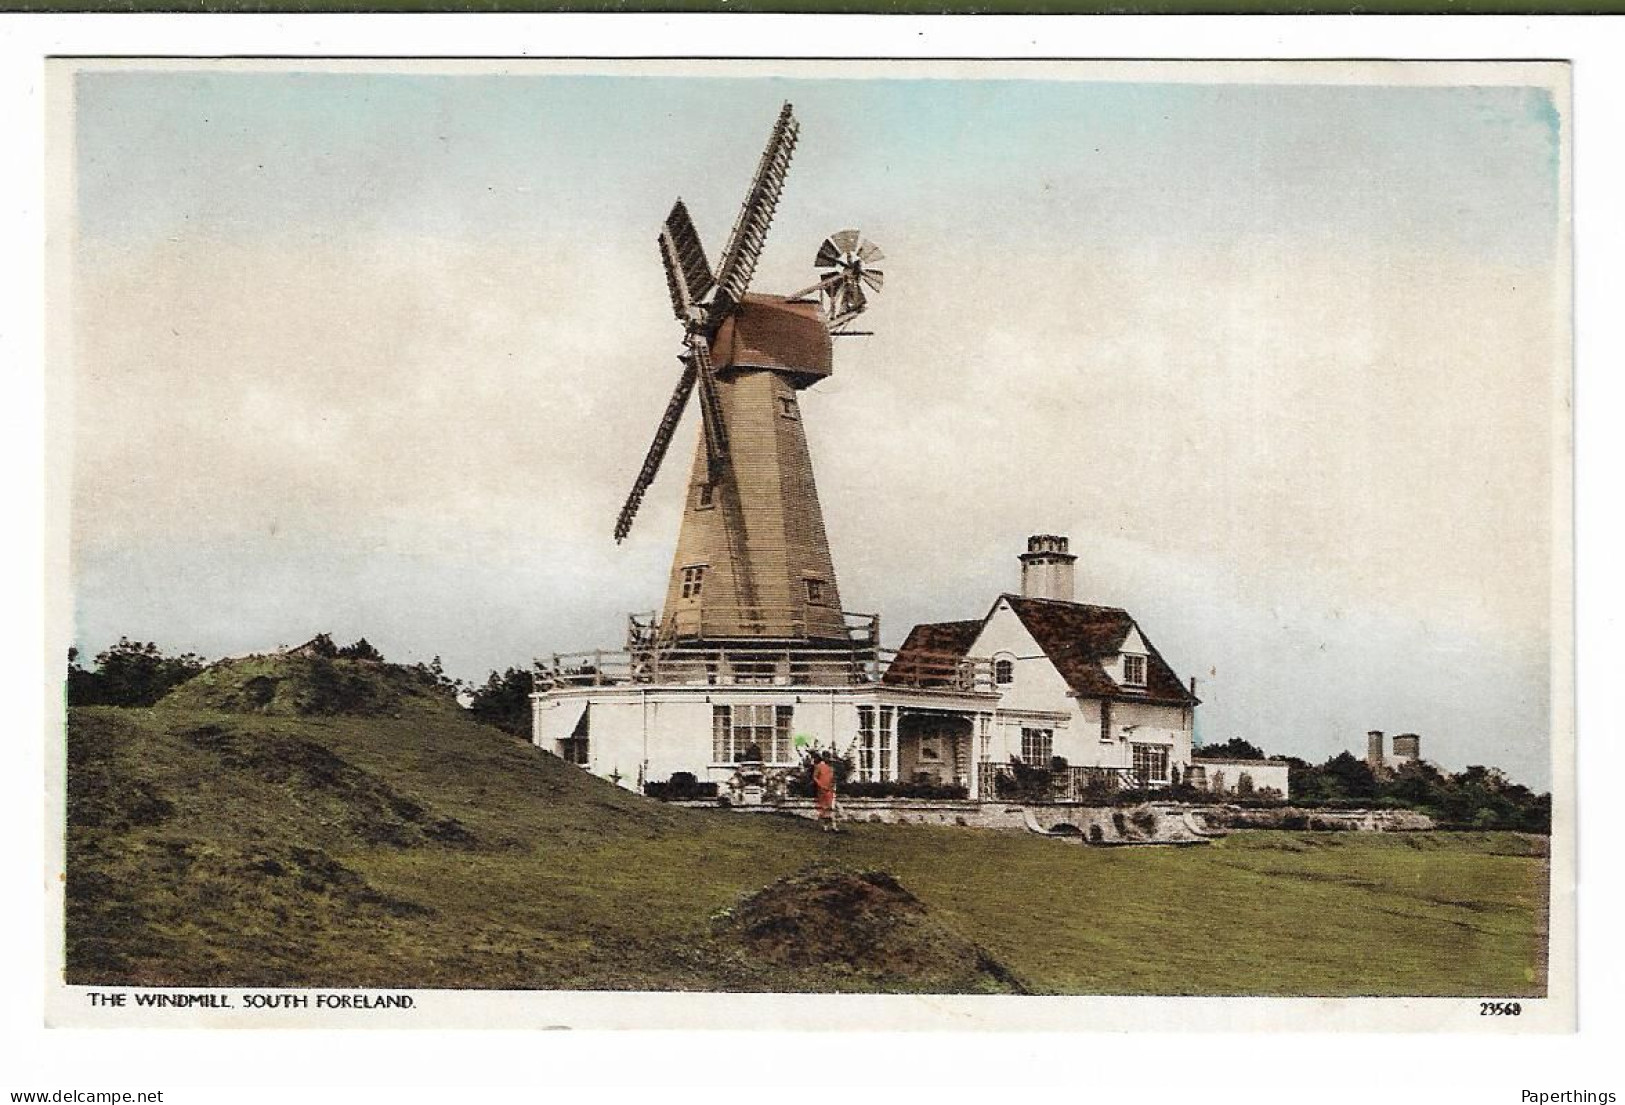 Postcard, Kent, Dover, St. Margarets-at-Cliffe, South Foreland, The Windmill, House, Landscape. - Dover